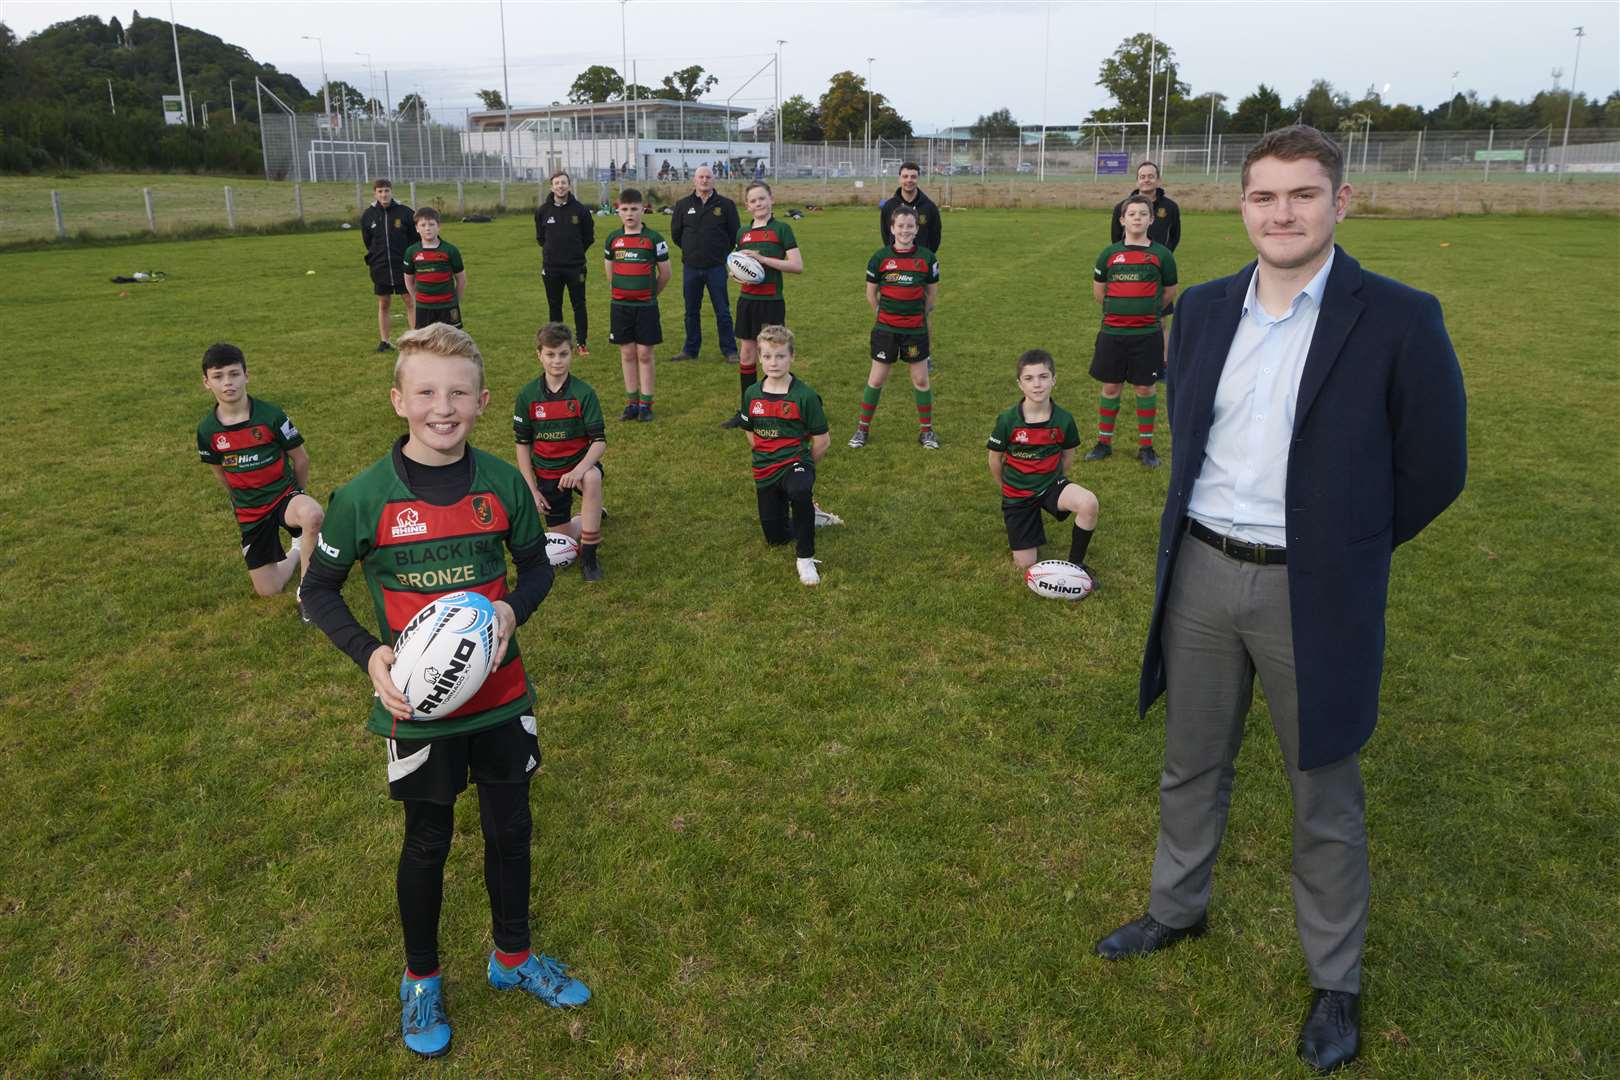 Aldi and Highland Rugby Club sponsorship. LtoR Graham Findlater, President HRC, Neil Malcolm, Aldi and Brian Knowles, Lead Coach Watching the U-13 training session. Front of photo Lachie Sangster (11) and Neil Malcom of Aldi.